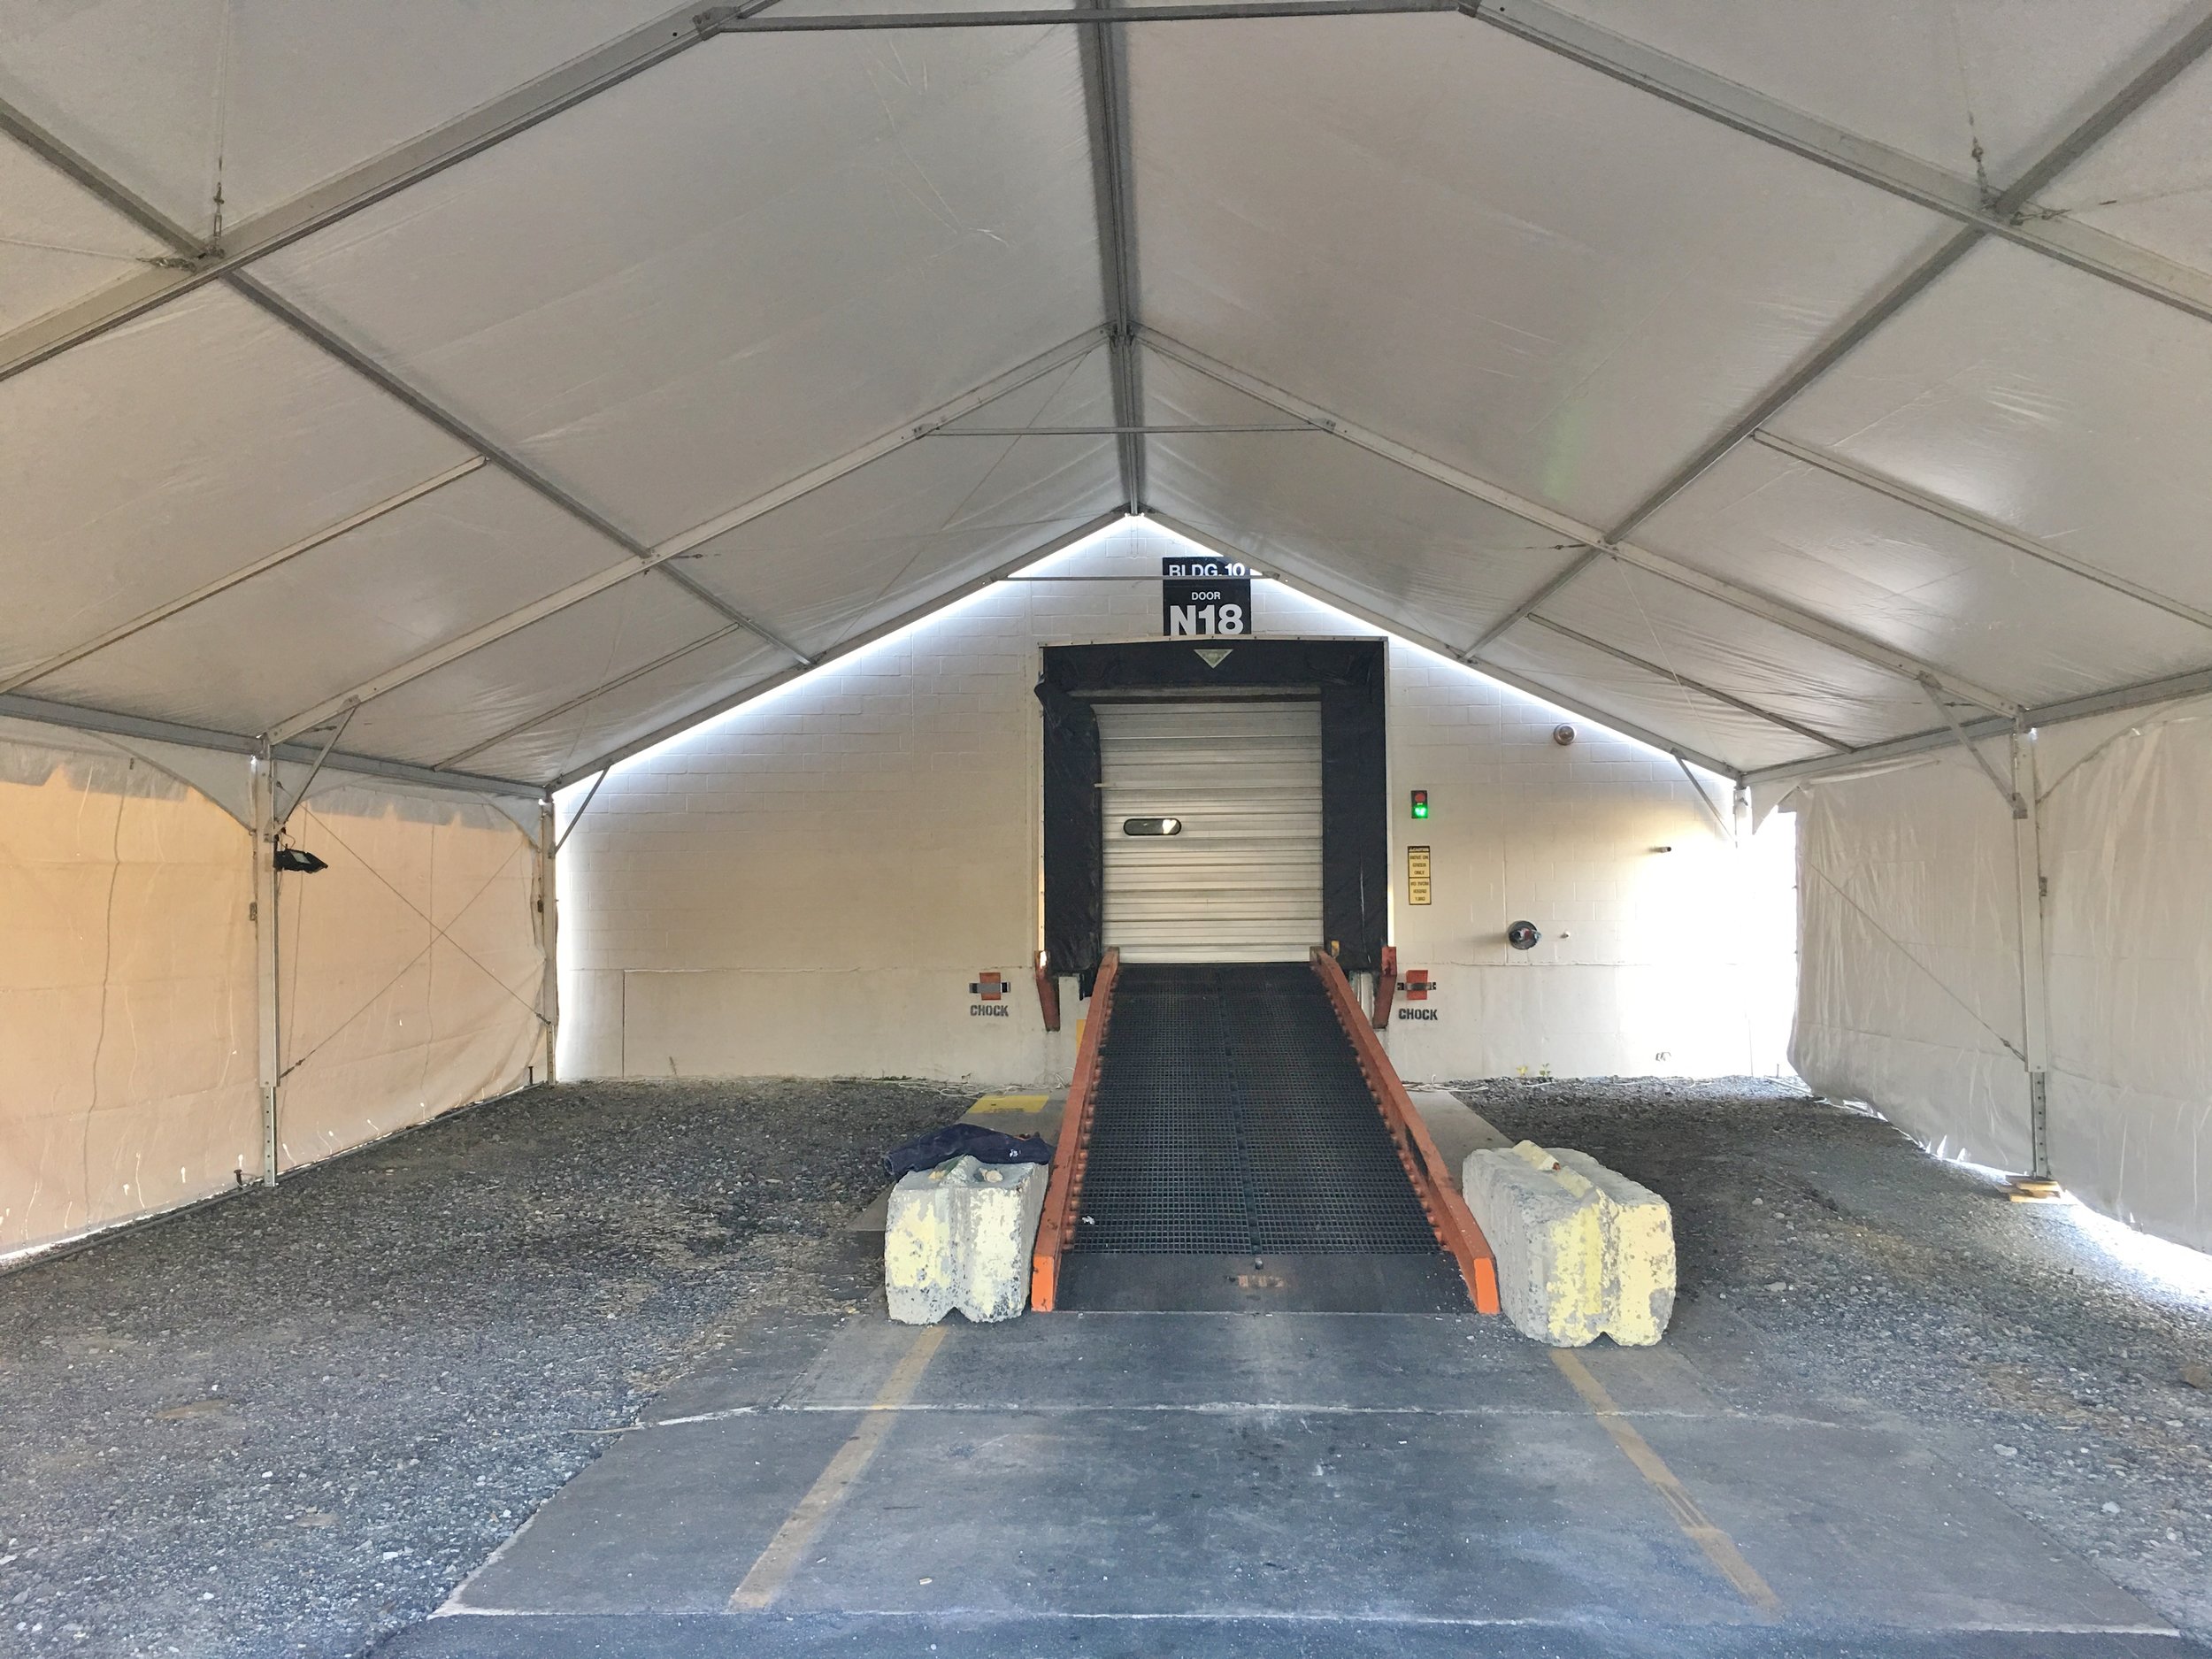 Temporary winter forklift ramp cover used during construction